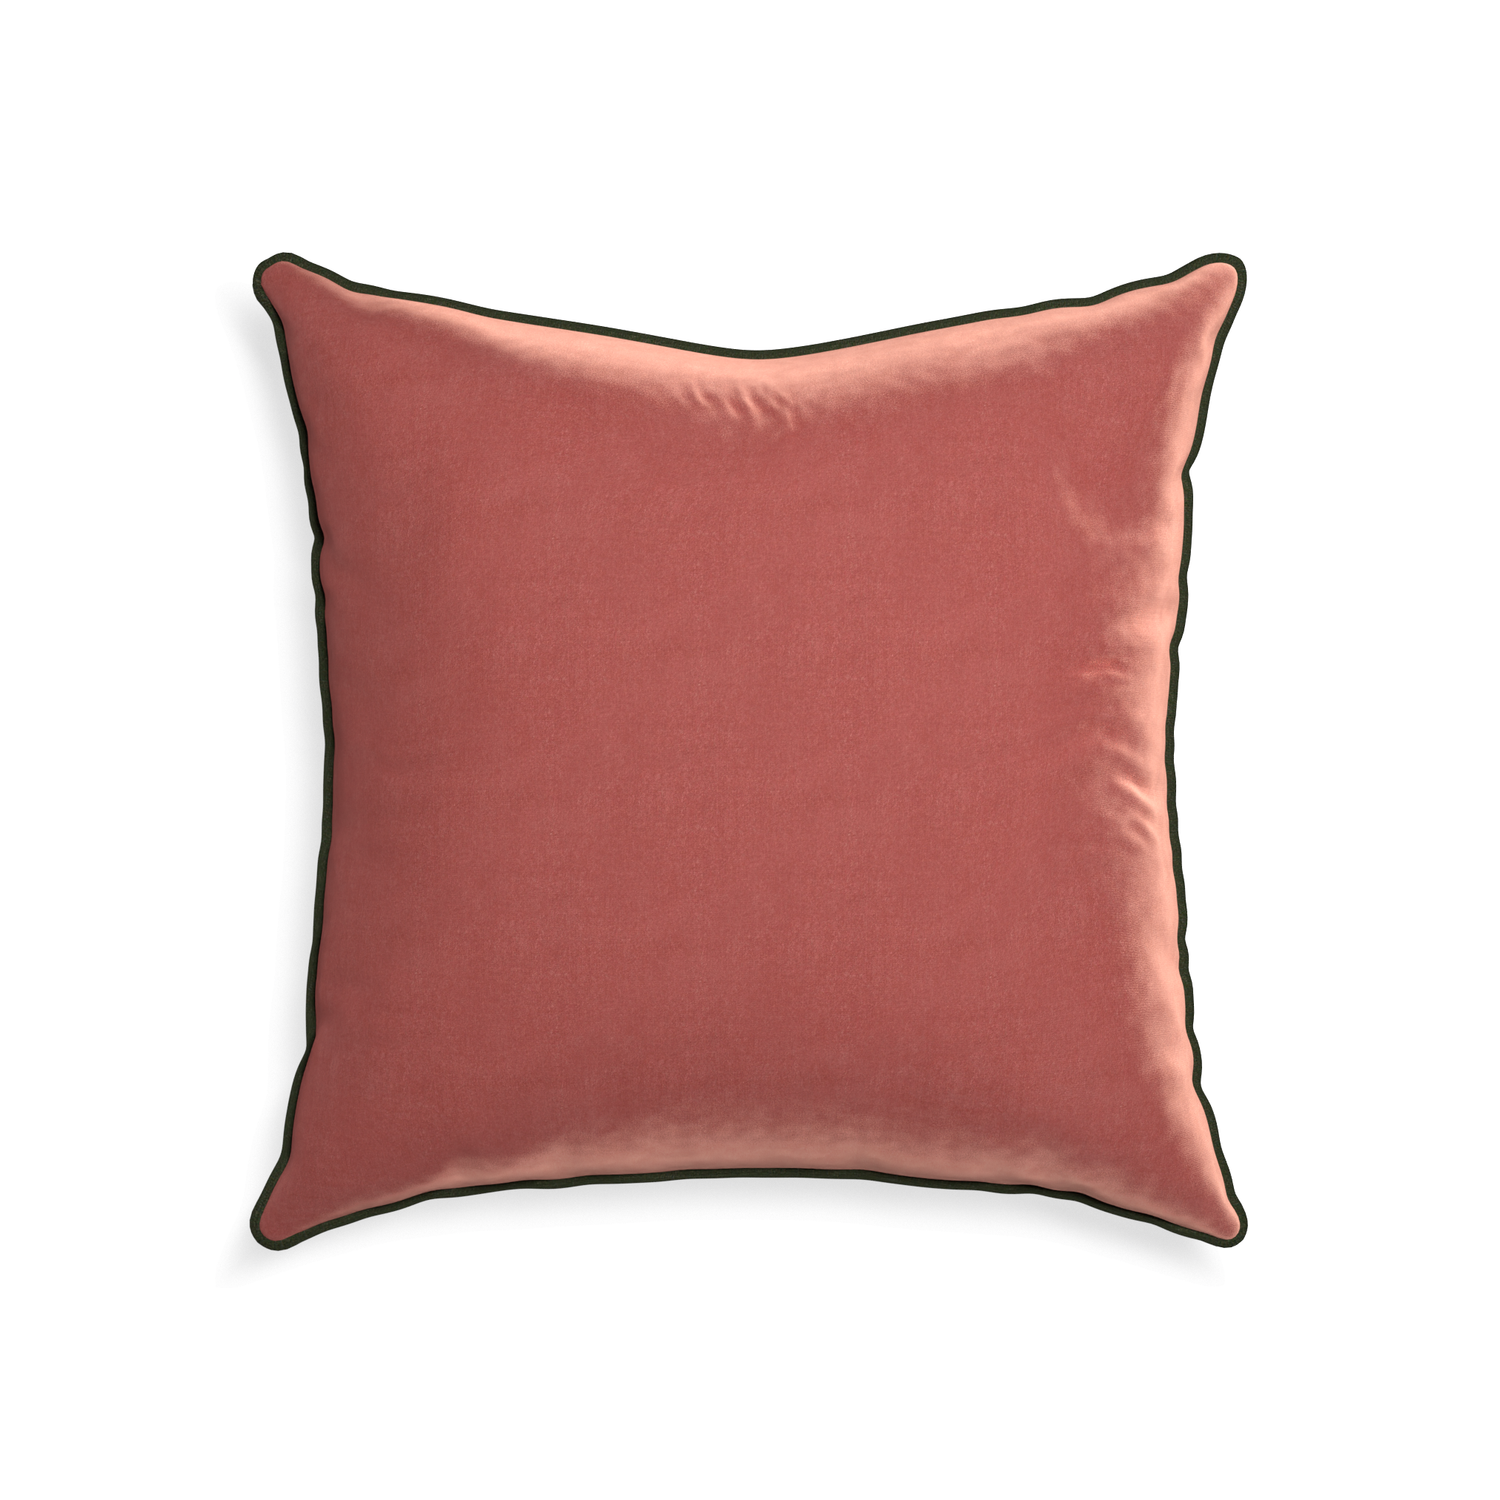 22-square cosmo velvet custom pillow with f piping on white background